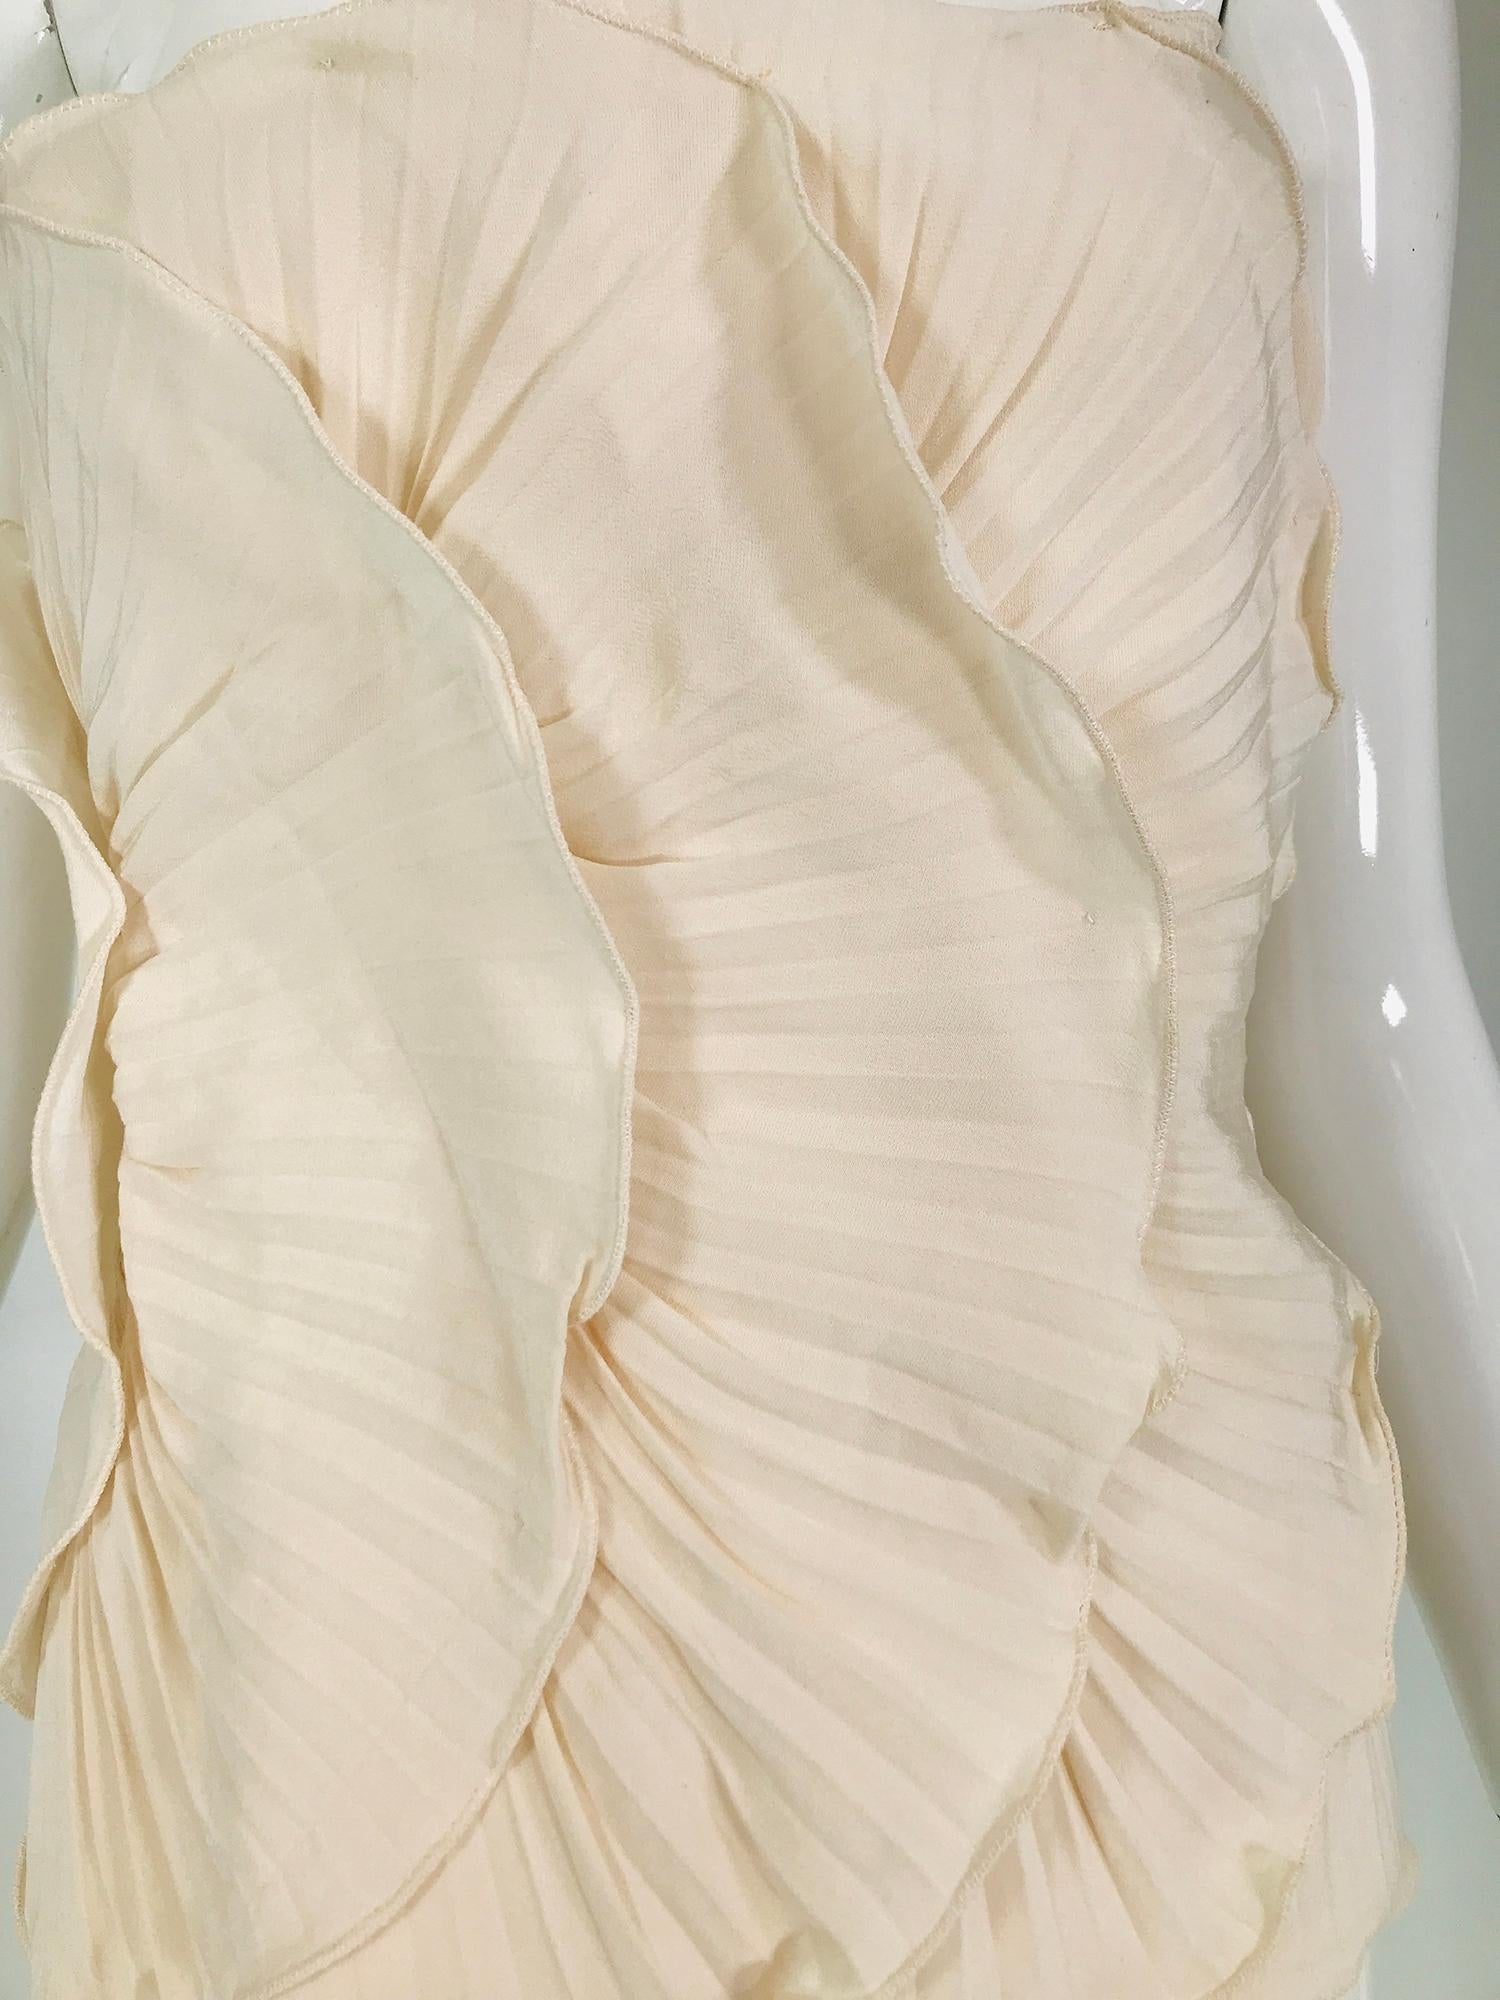 Mila Schon Ivory Bustier Plisse Silk 1980s unworn with tags size 40 For Sale 4